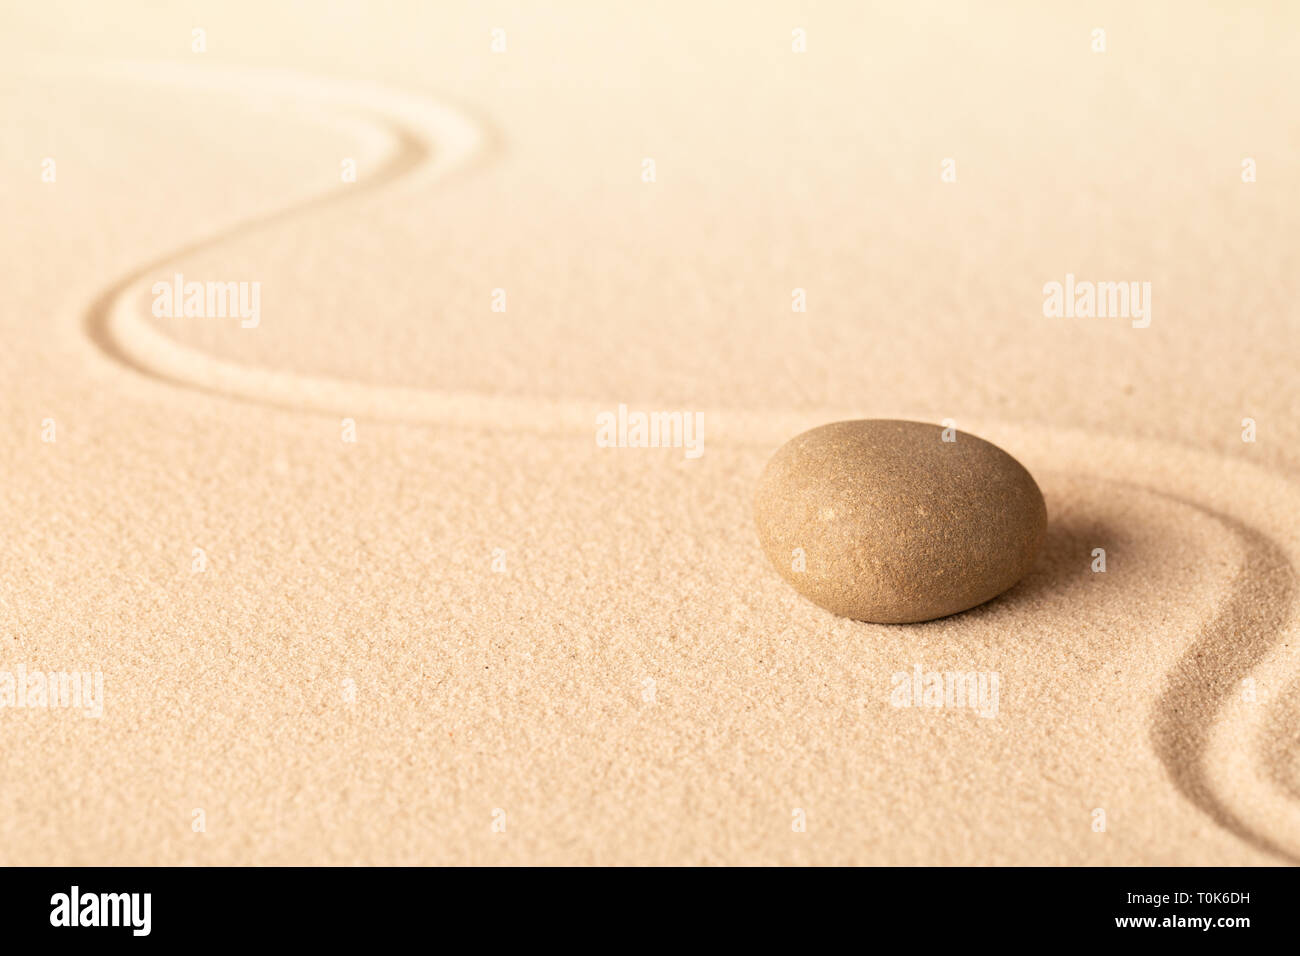 Concentration trough focus on a zen meditation stone. Round rock in sand texture background. Concept for yoga or spa welness treatment. Stock Photo